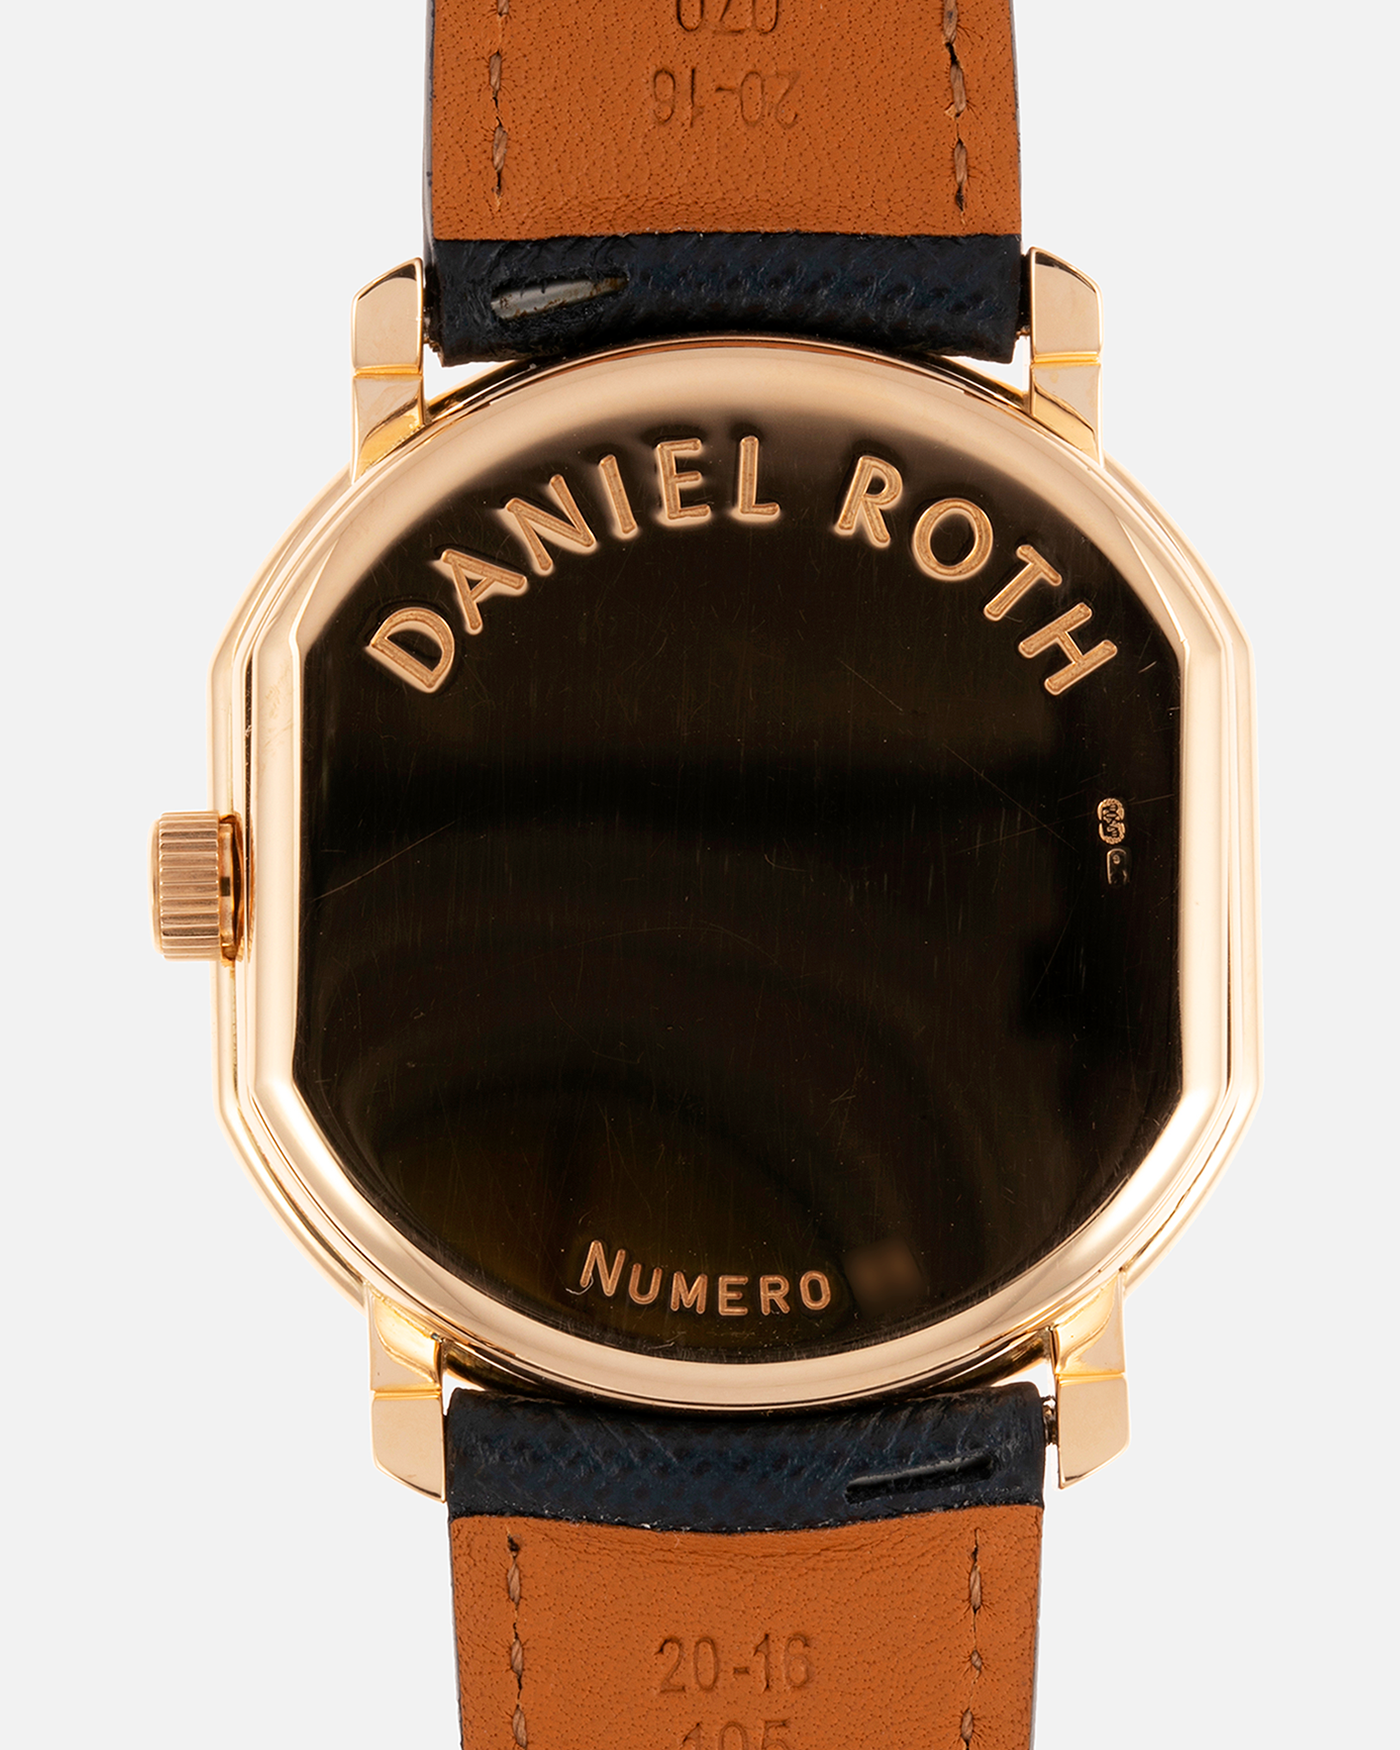 Brand: Daniel Roth Year: 1990’s Model: C127 Material: 18k Yellow Gold Movement: Lemania 27LN with Retrograde Function Case Diameter: 35mm X 38mm Strap: Molequin Navy Blue Textured Calf Strap and 18k Yellow Gold Daniel Roth Tang Buckle